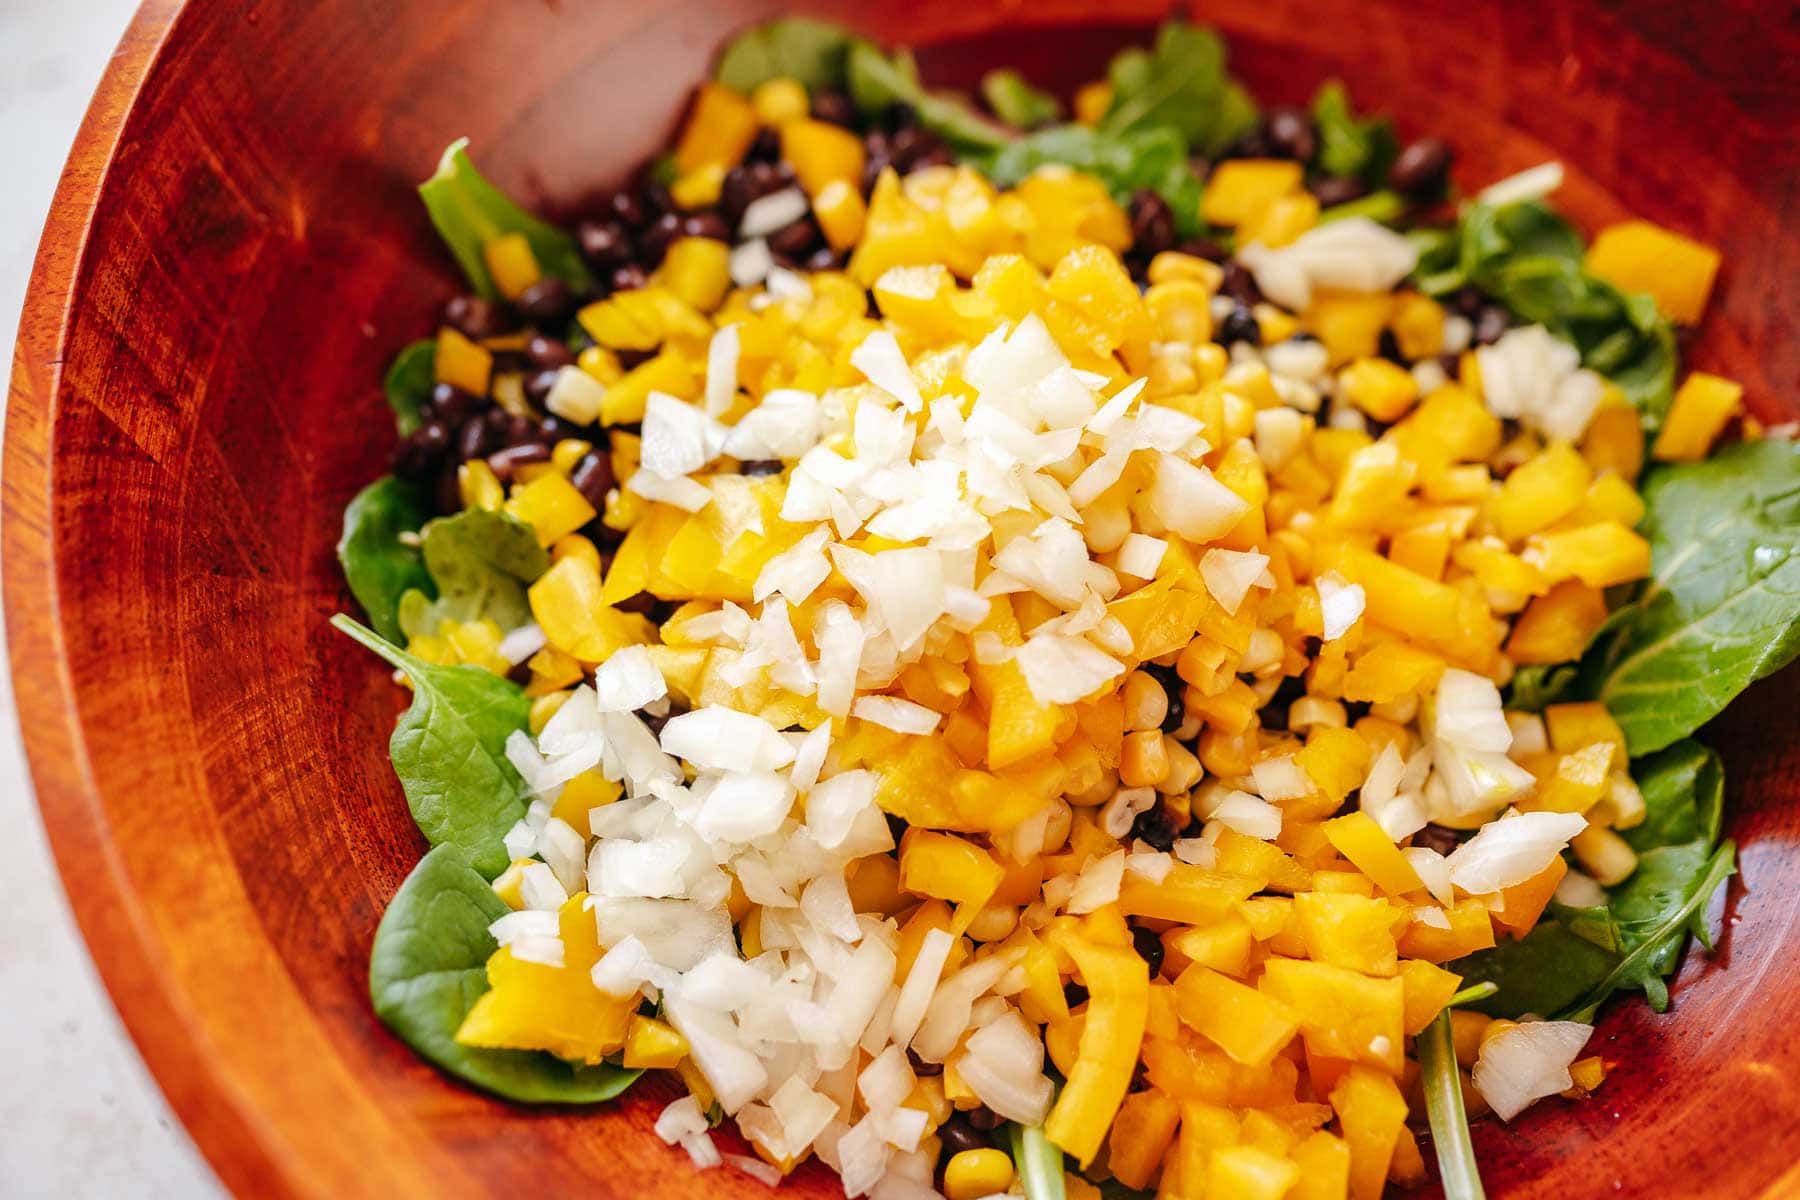 A large wooden salad bowl filled with greens. corn, onions and beans.